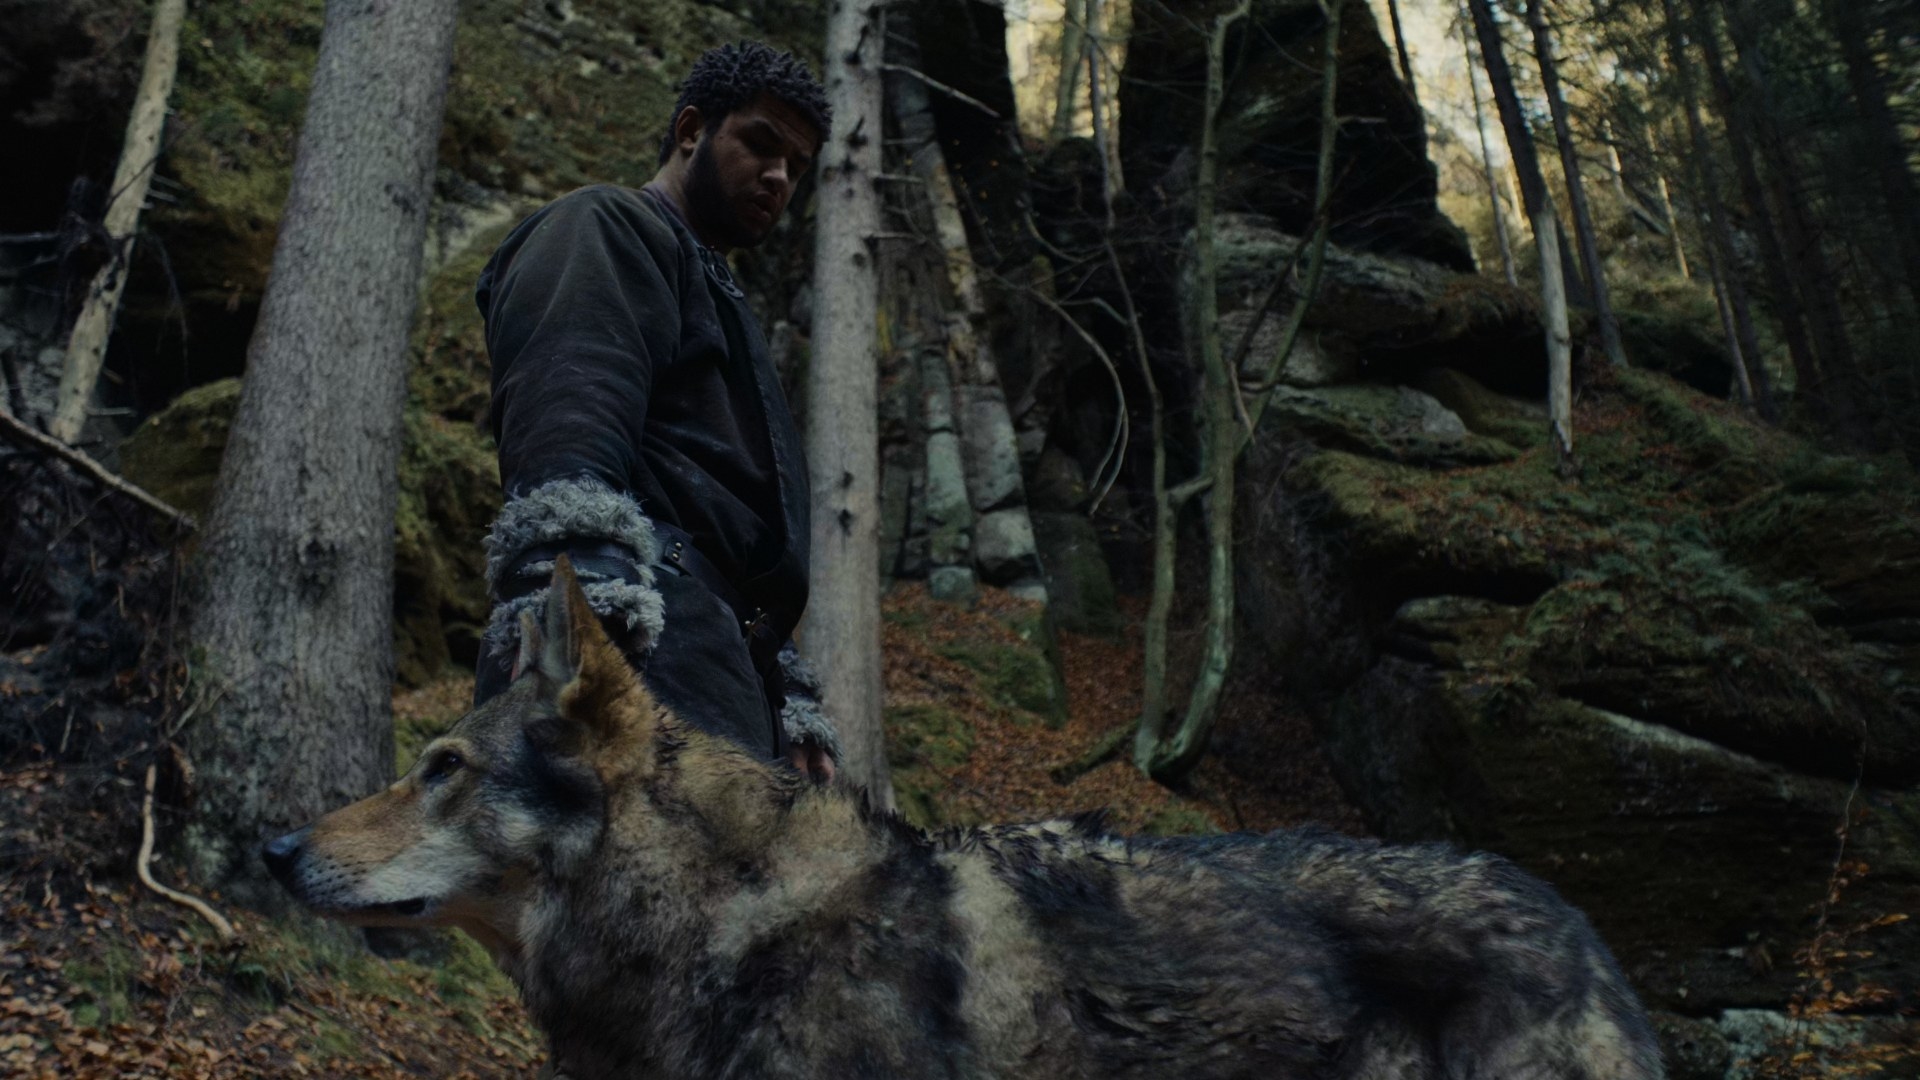 A low-angle shot that shows a grey-pelted wolf standing nonchalantly beside Perrin, who looks down wonderingly at the wolf who does not seem to wish to hurt him